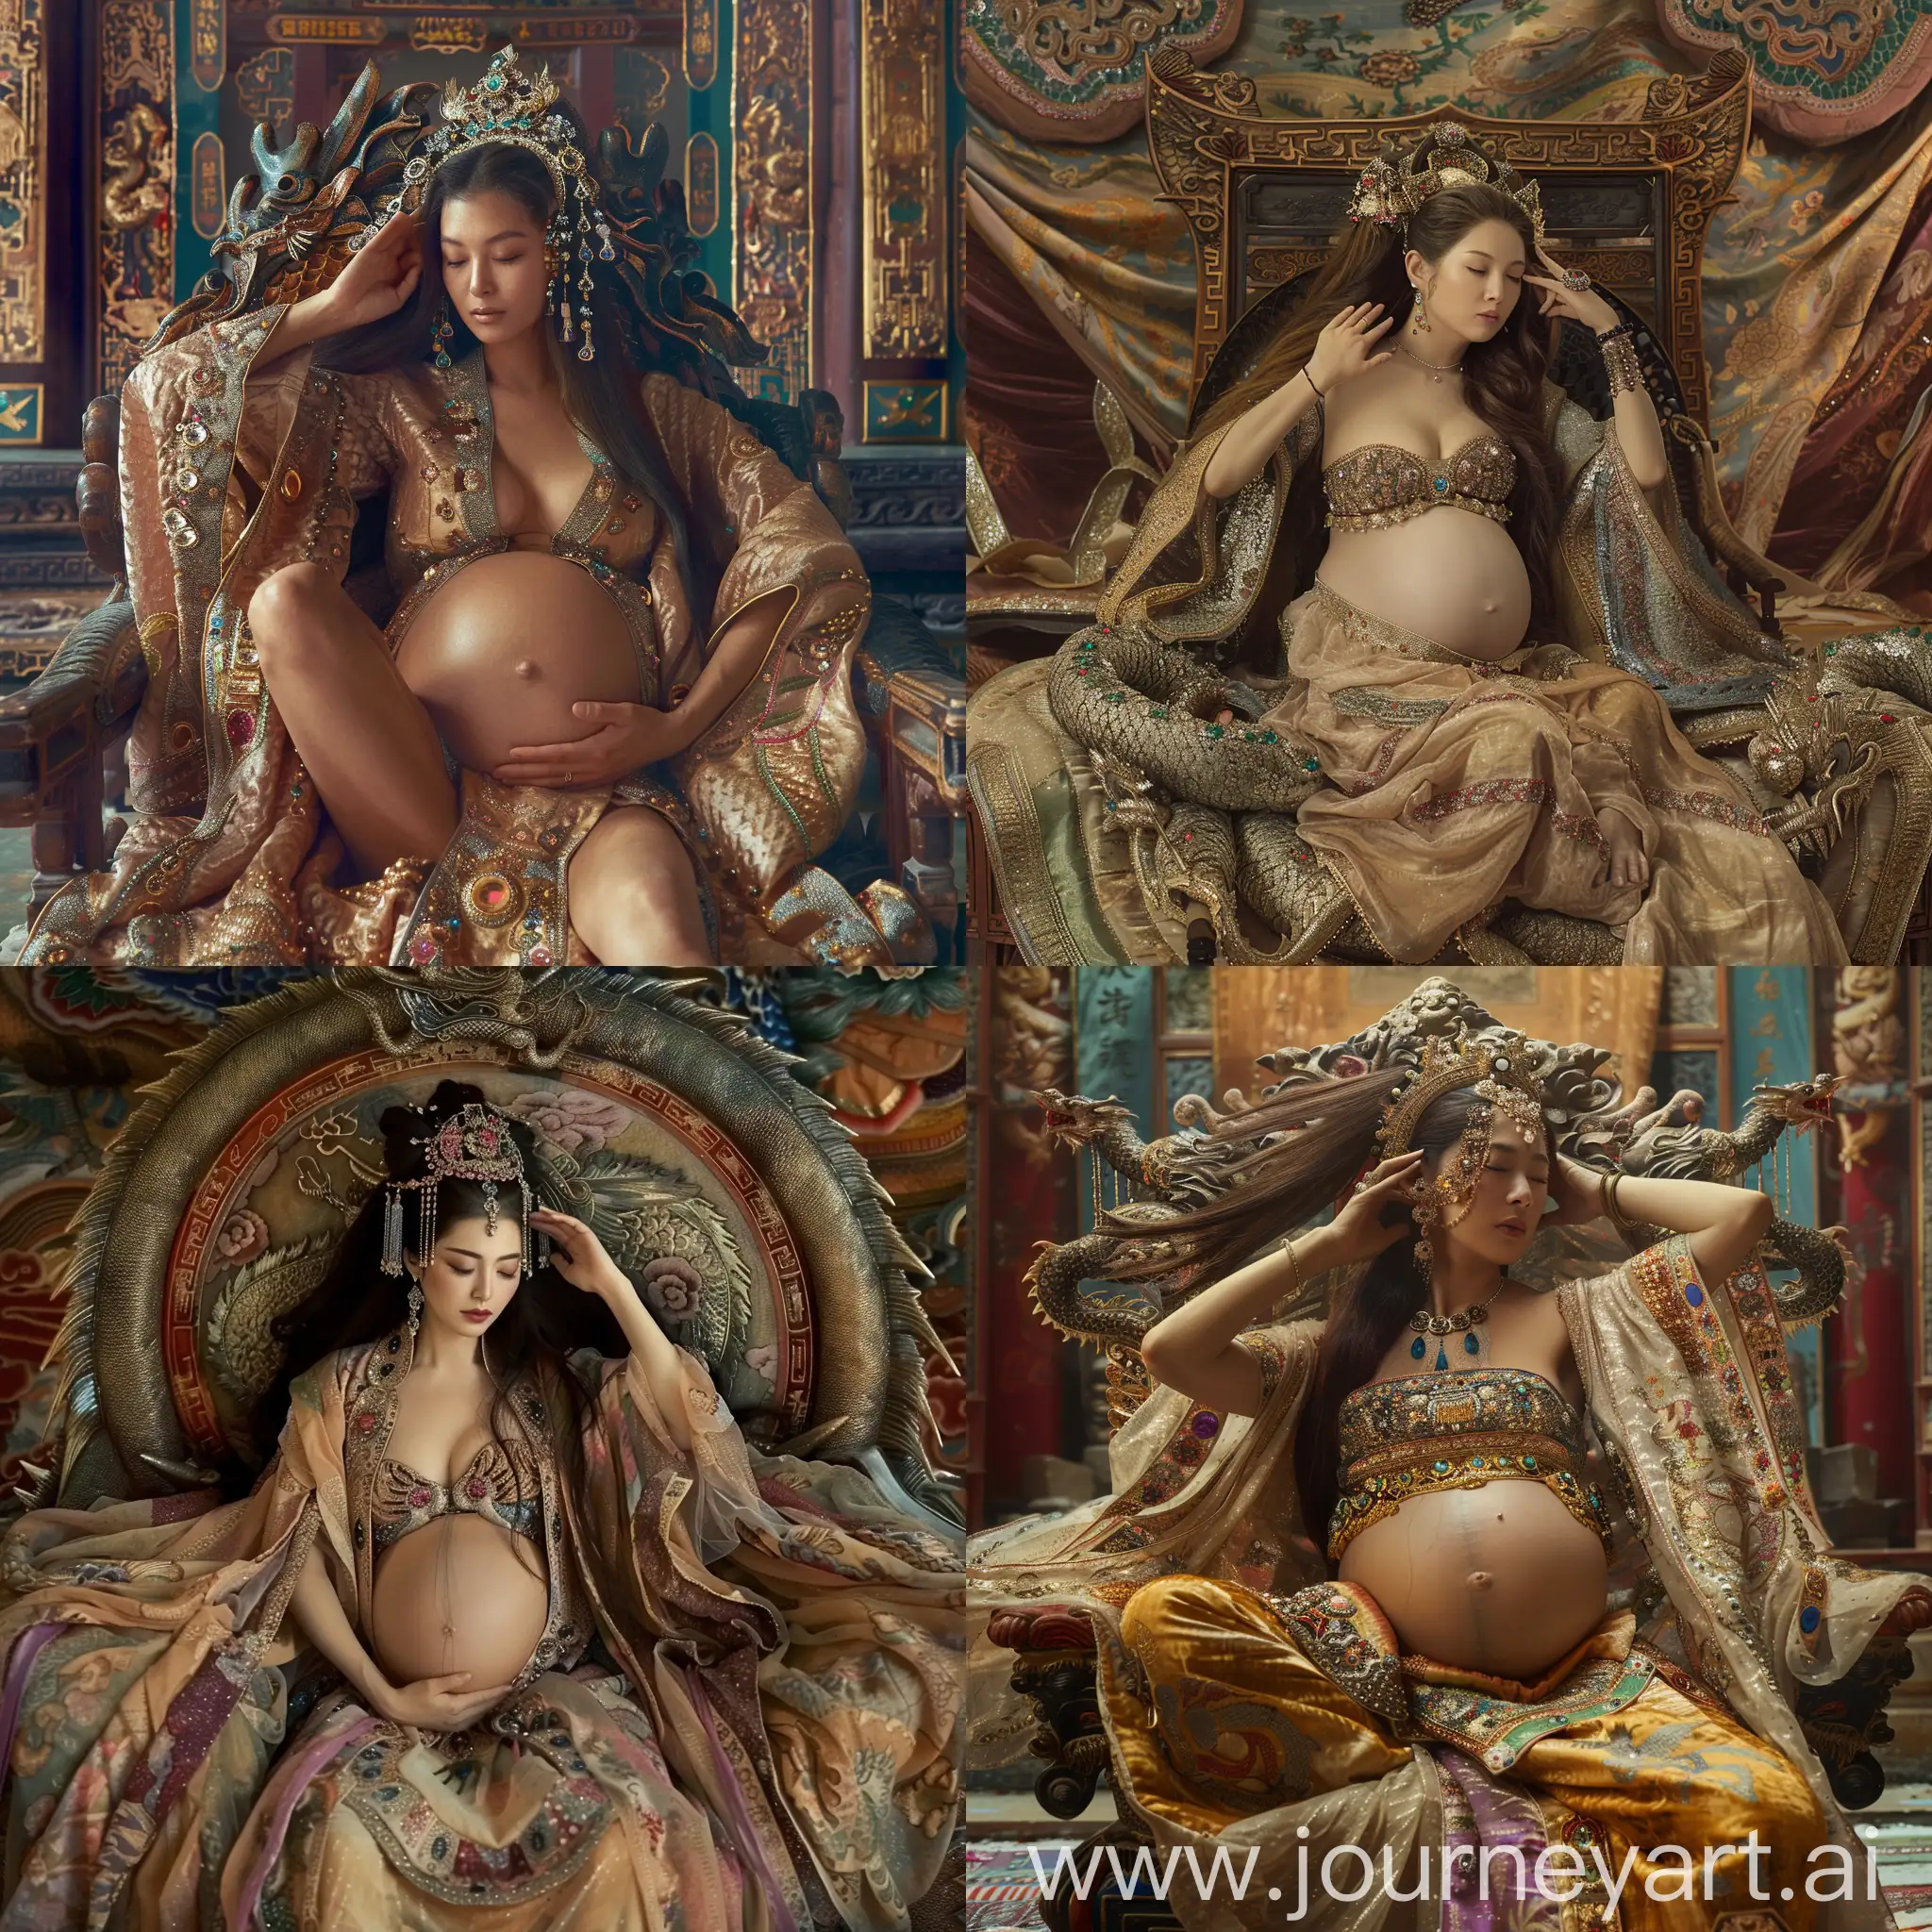 Pregnant-Empress-Wu-Zetian-Rests-on-Dragon-Throne-in-Magnificent-Palace-Setting